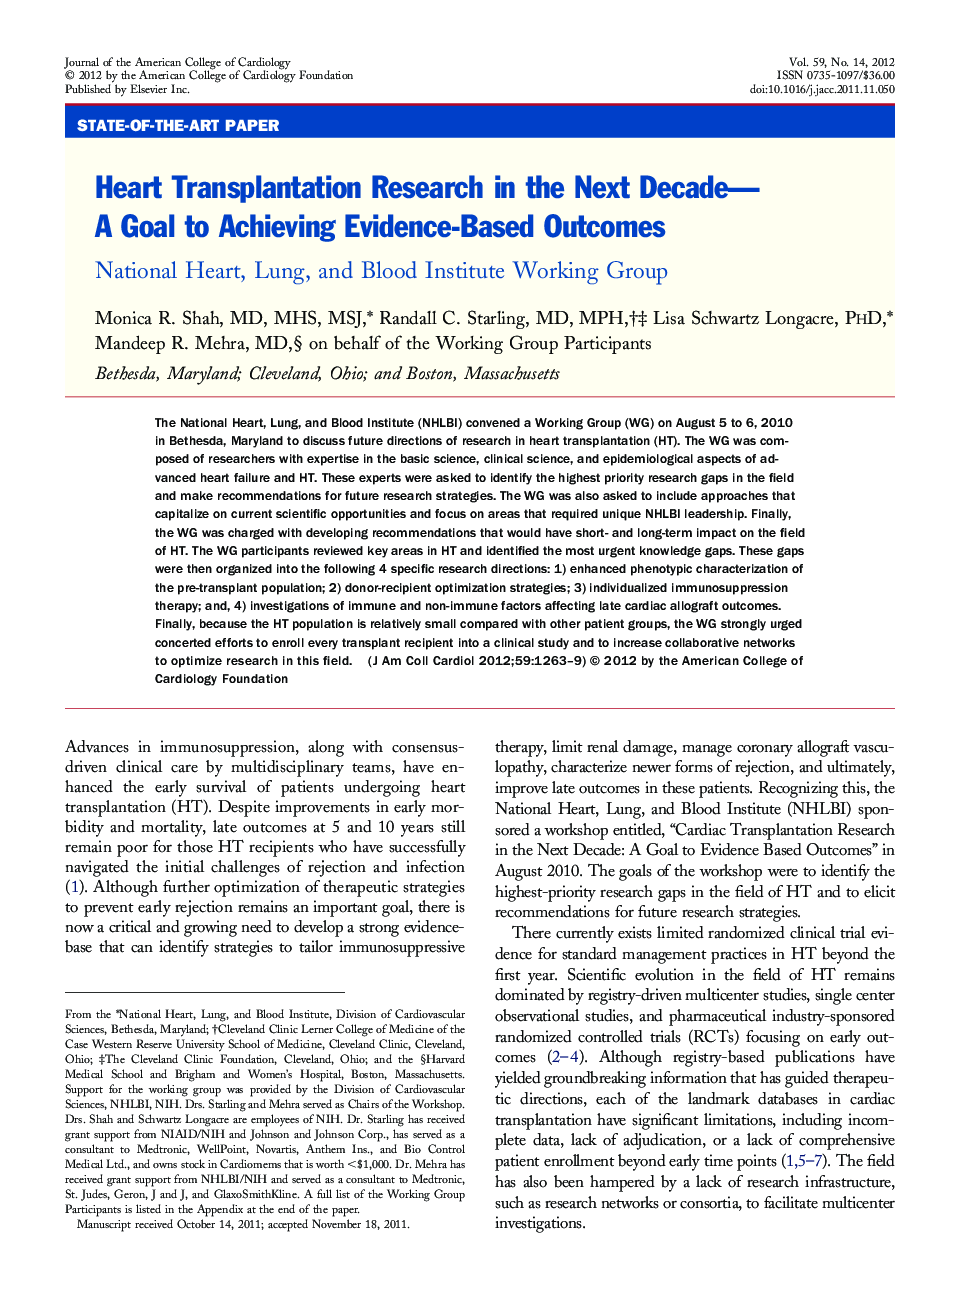 Heart Transplantation Research in the Next Decade—A Goal to Achieving Evidence-Based Outcomes : National Heart, Lung, and Blood Institute Working Group